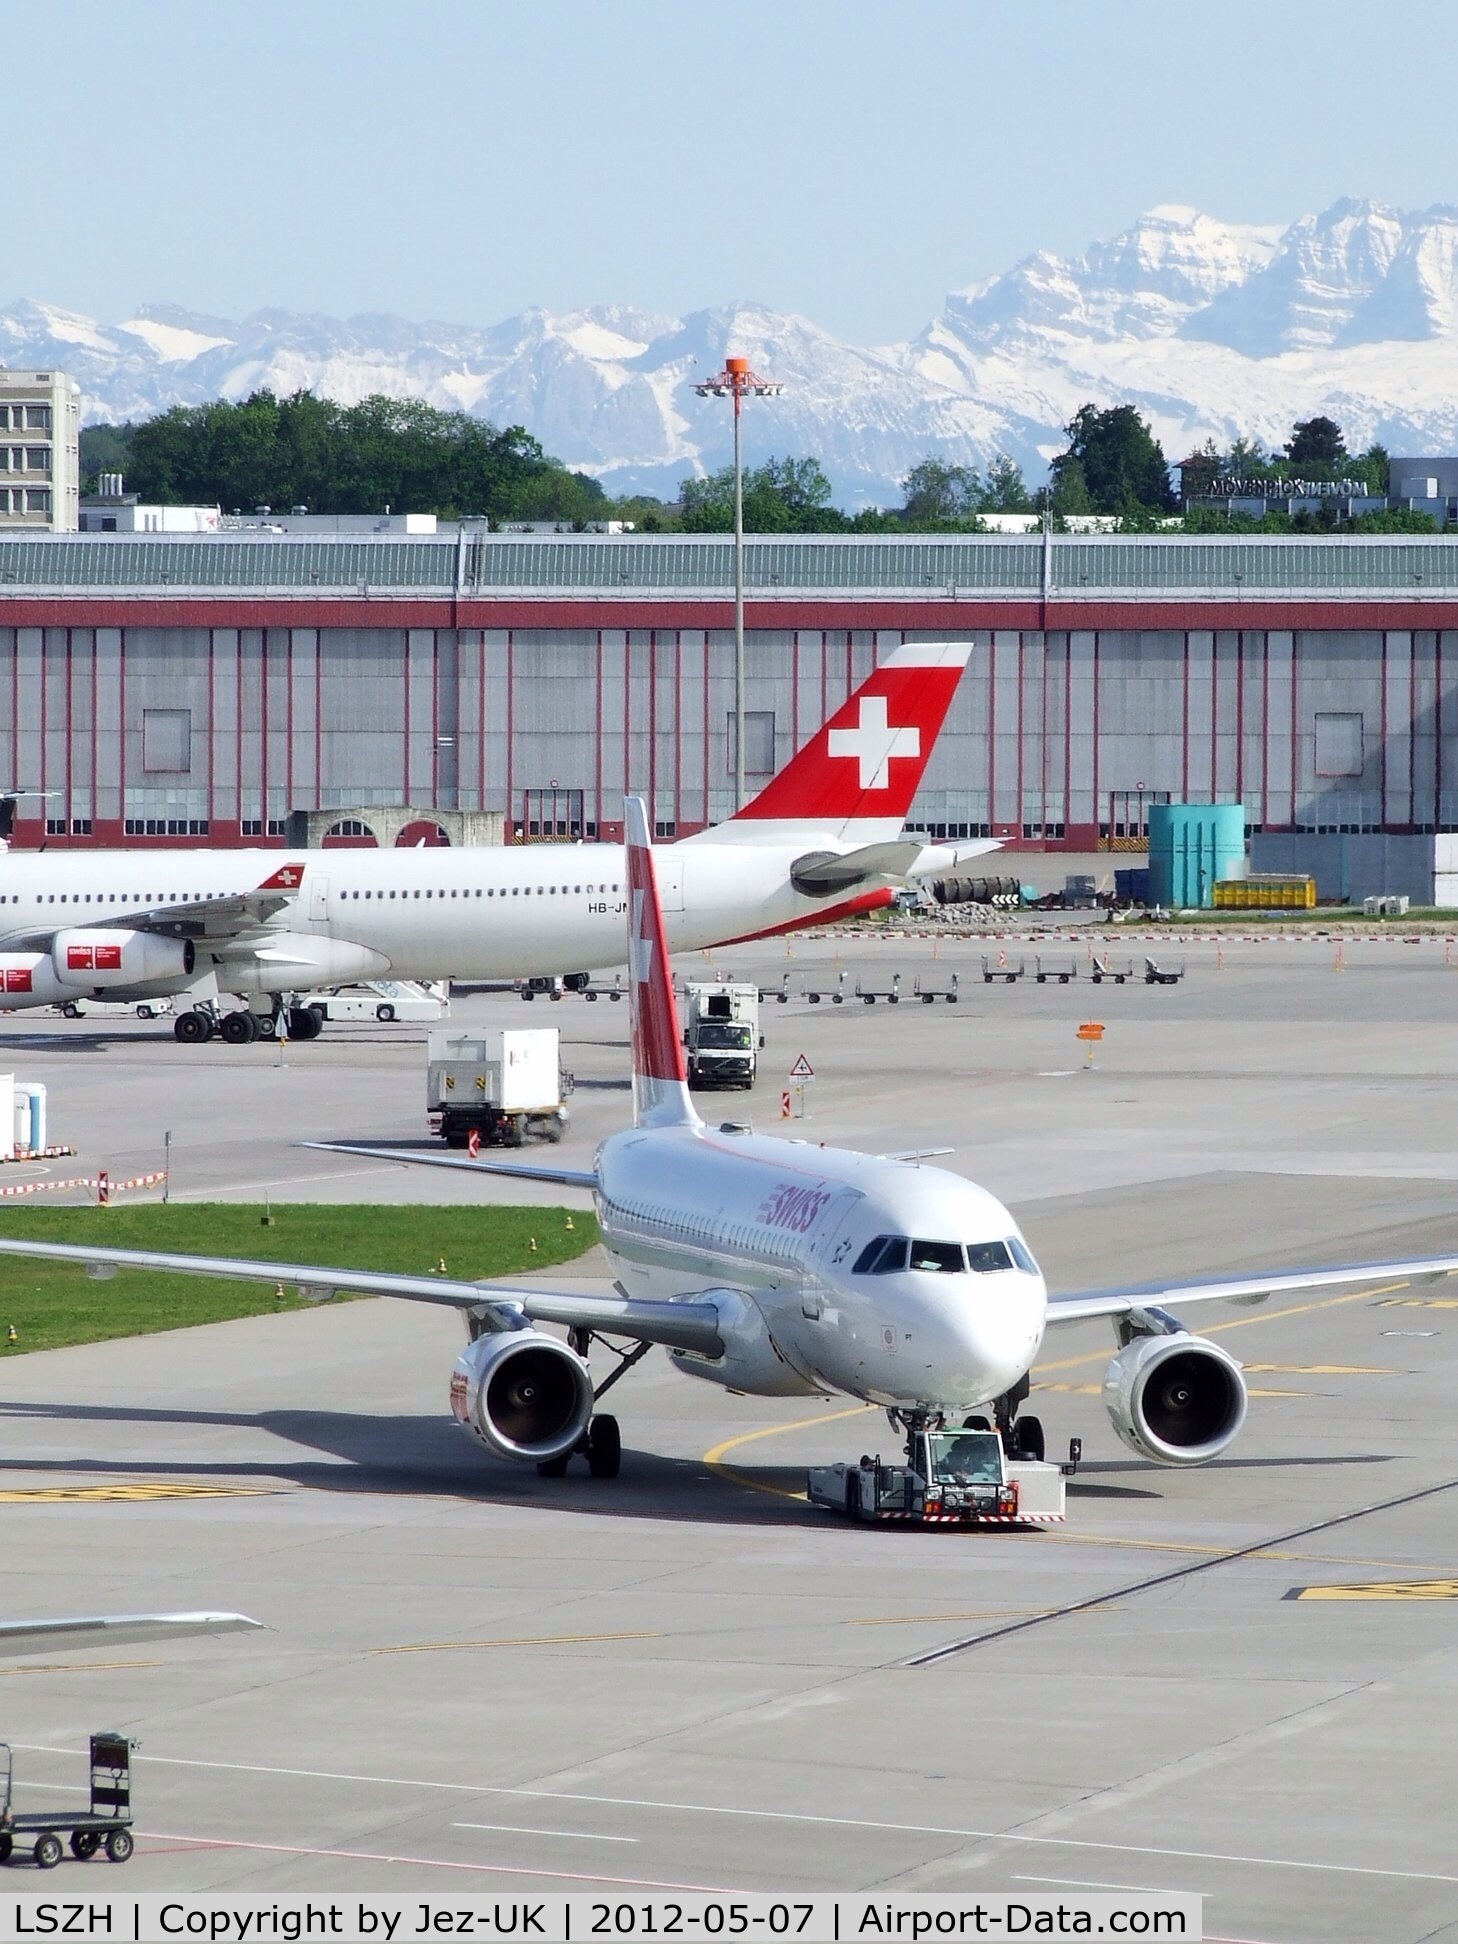 Zurich International Airport, Zurich Switzerland (LSZH) - a view from one of spectator terraces of one of main aprons with the mountains oo the Alps in background,